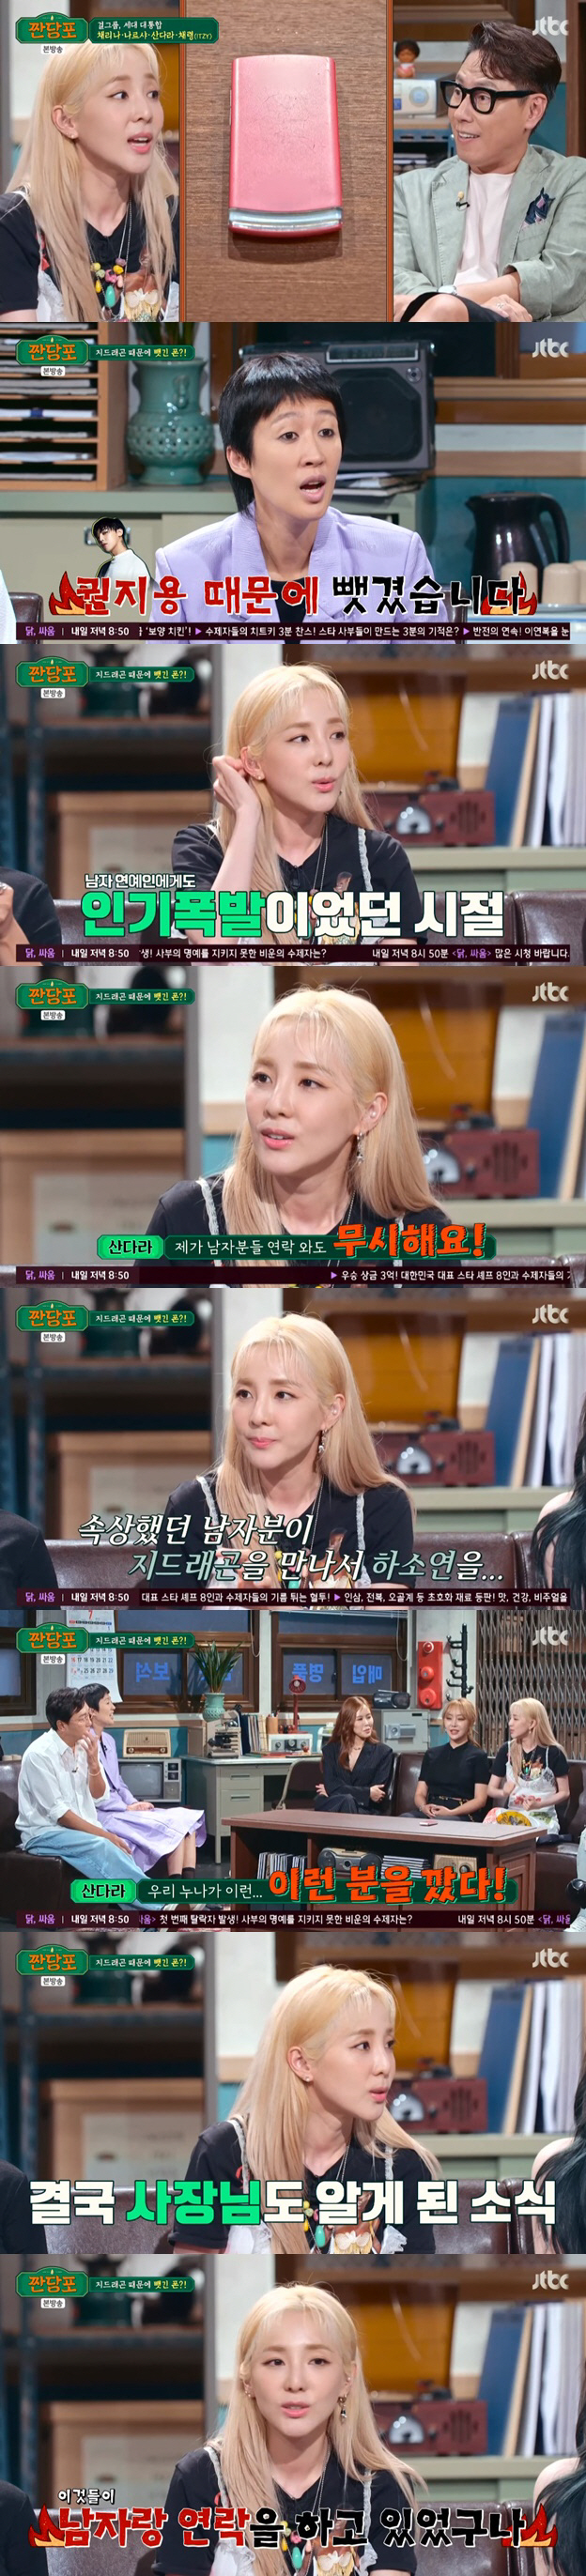 Woven sugar cloth Sandara Park has revealed an extraordinary story involving G-Dragon (real name Kwon Ji Yong).In the JTBC woven sugar cloth broadcast on the 18th, Chae Ri-na, Narsha, Sandara Park, and Chaeryeong, who represent the Republic of Korea, appeared.On this day, Chae Ri-na showed sincerity in soccer entertainment, saying that no one was late after joining the soccer team.Chae Ri-na said in the early days of joining the soccer team that he decided to show it once after seeing the evil such as I can not play for one minute.Tak Jae-hun, who listened to them, laughed and laughed, saying, I might have been worried about real health, not evil.Sandara Park said, I think it will fit well with Tak Jae-hun, who is the opposite of my good image. I did not save Yoo Jae-seok. It is not easy to save me.But Tak Jae-hun seems to be able to save me. Narsha said, Can not I ride the Tak Line?Tak Jae-hun said, Its too heavy to ride, and made the scene into a laughing sea.When Tak Jae-hun said, Take Mr. Chaeryeong, Chaeryeong said, Its too good, but its okay.In particular, Sandara Park took out the cell phone that was used in 2009 and said, It was taken away because of Kwon Ji Yong.It is a precious cell phone that was taken back by the boss and returned. He confessed his shocking story and focused his attention.Sandara Park said, I advertised the cell phone and we actually wrote it. At that time, I was popular with male entertainers. There were a lot of liaisons here and there.However, I ignored the liaison to the men and did not reply. But a man who was upset met G-Dragon and complained, Dara sister is not liaison. But when she heard about it, G-Dragon said she was in a good mood.It was the first girl group from YG and our pride, and I was so happy that my sister kicked this person and made a rumor to the company.I went to my bosss ear, and the boss took the cell phone because he thought we were doing liaison with a man. So I spent a few months without a cell phone. Even though 2NE1 is our older sister, its the first junior group to come out under the Big Bang, so G-Dragon took great care of us. Theyre so interested that theyre even interested in the back story, he added.